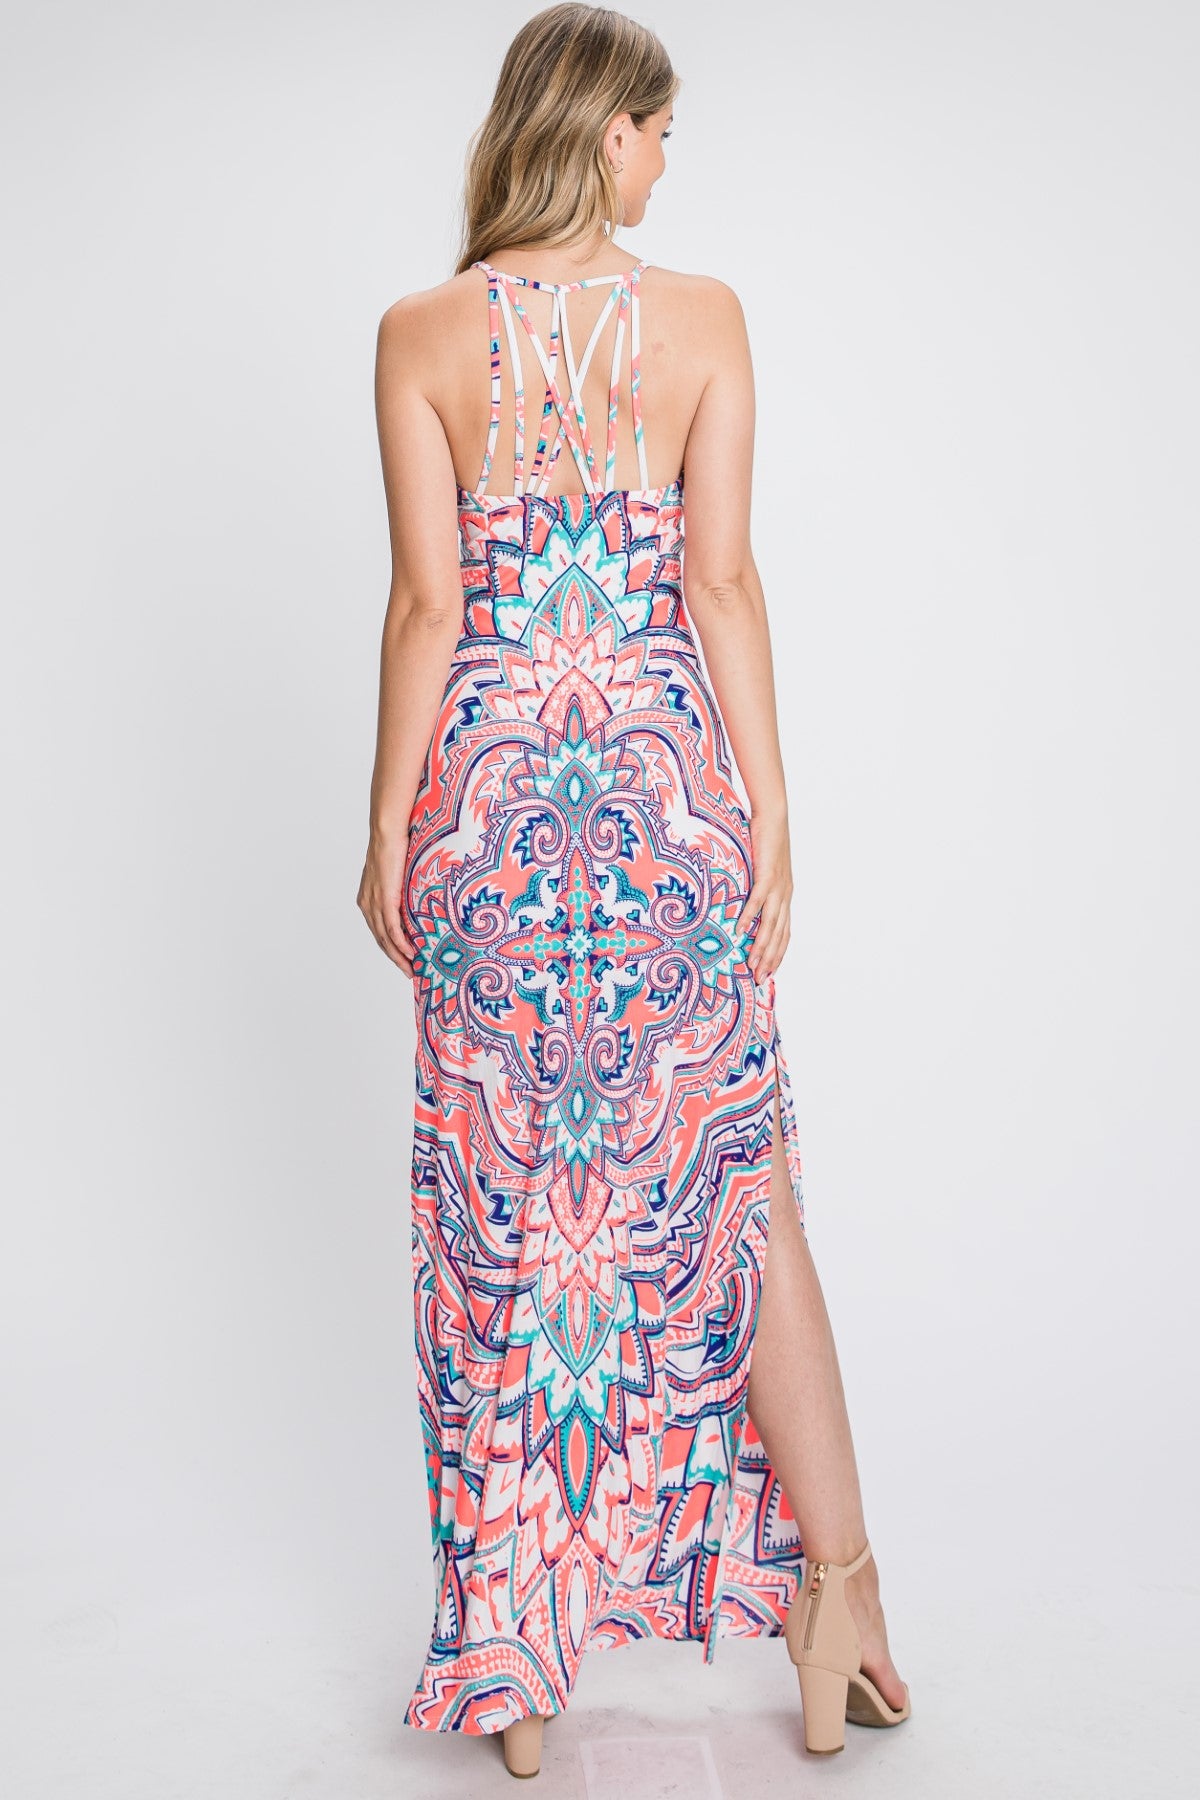 Criss Cross Strappy Back With Abstract Design Maxi Dress